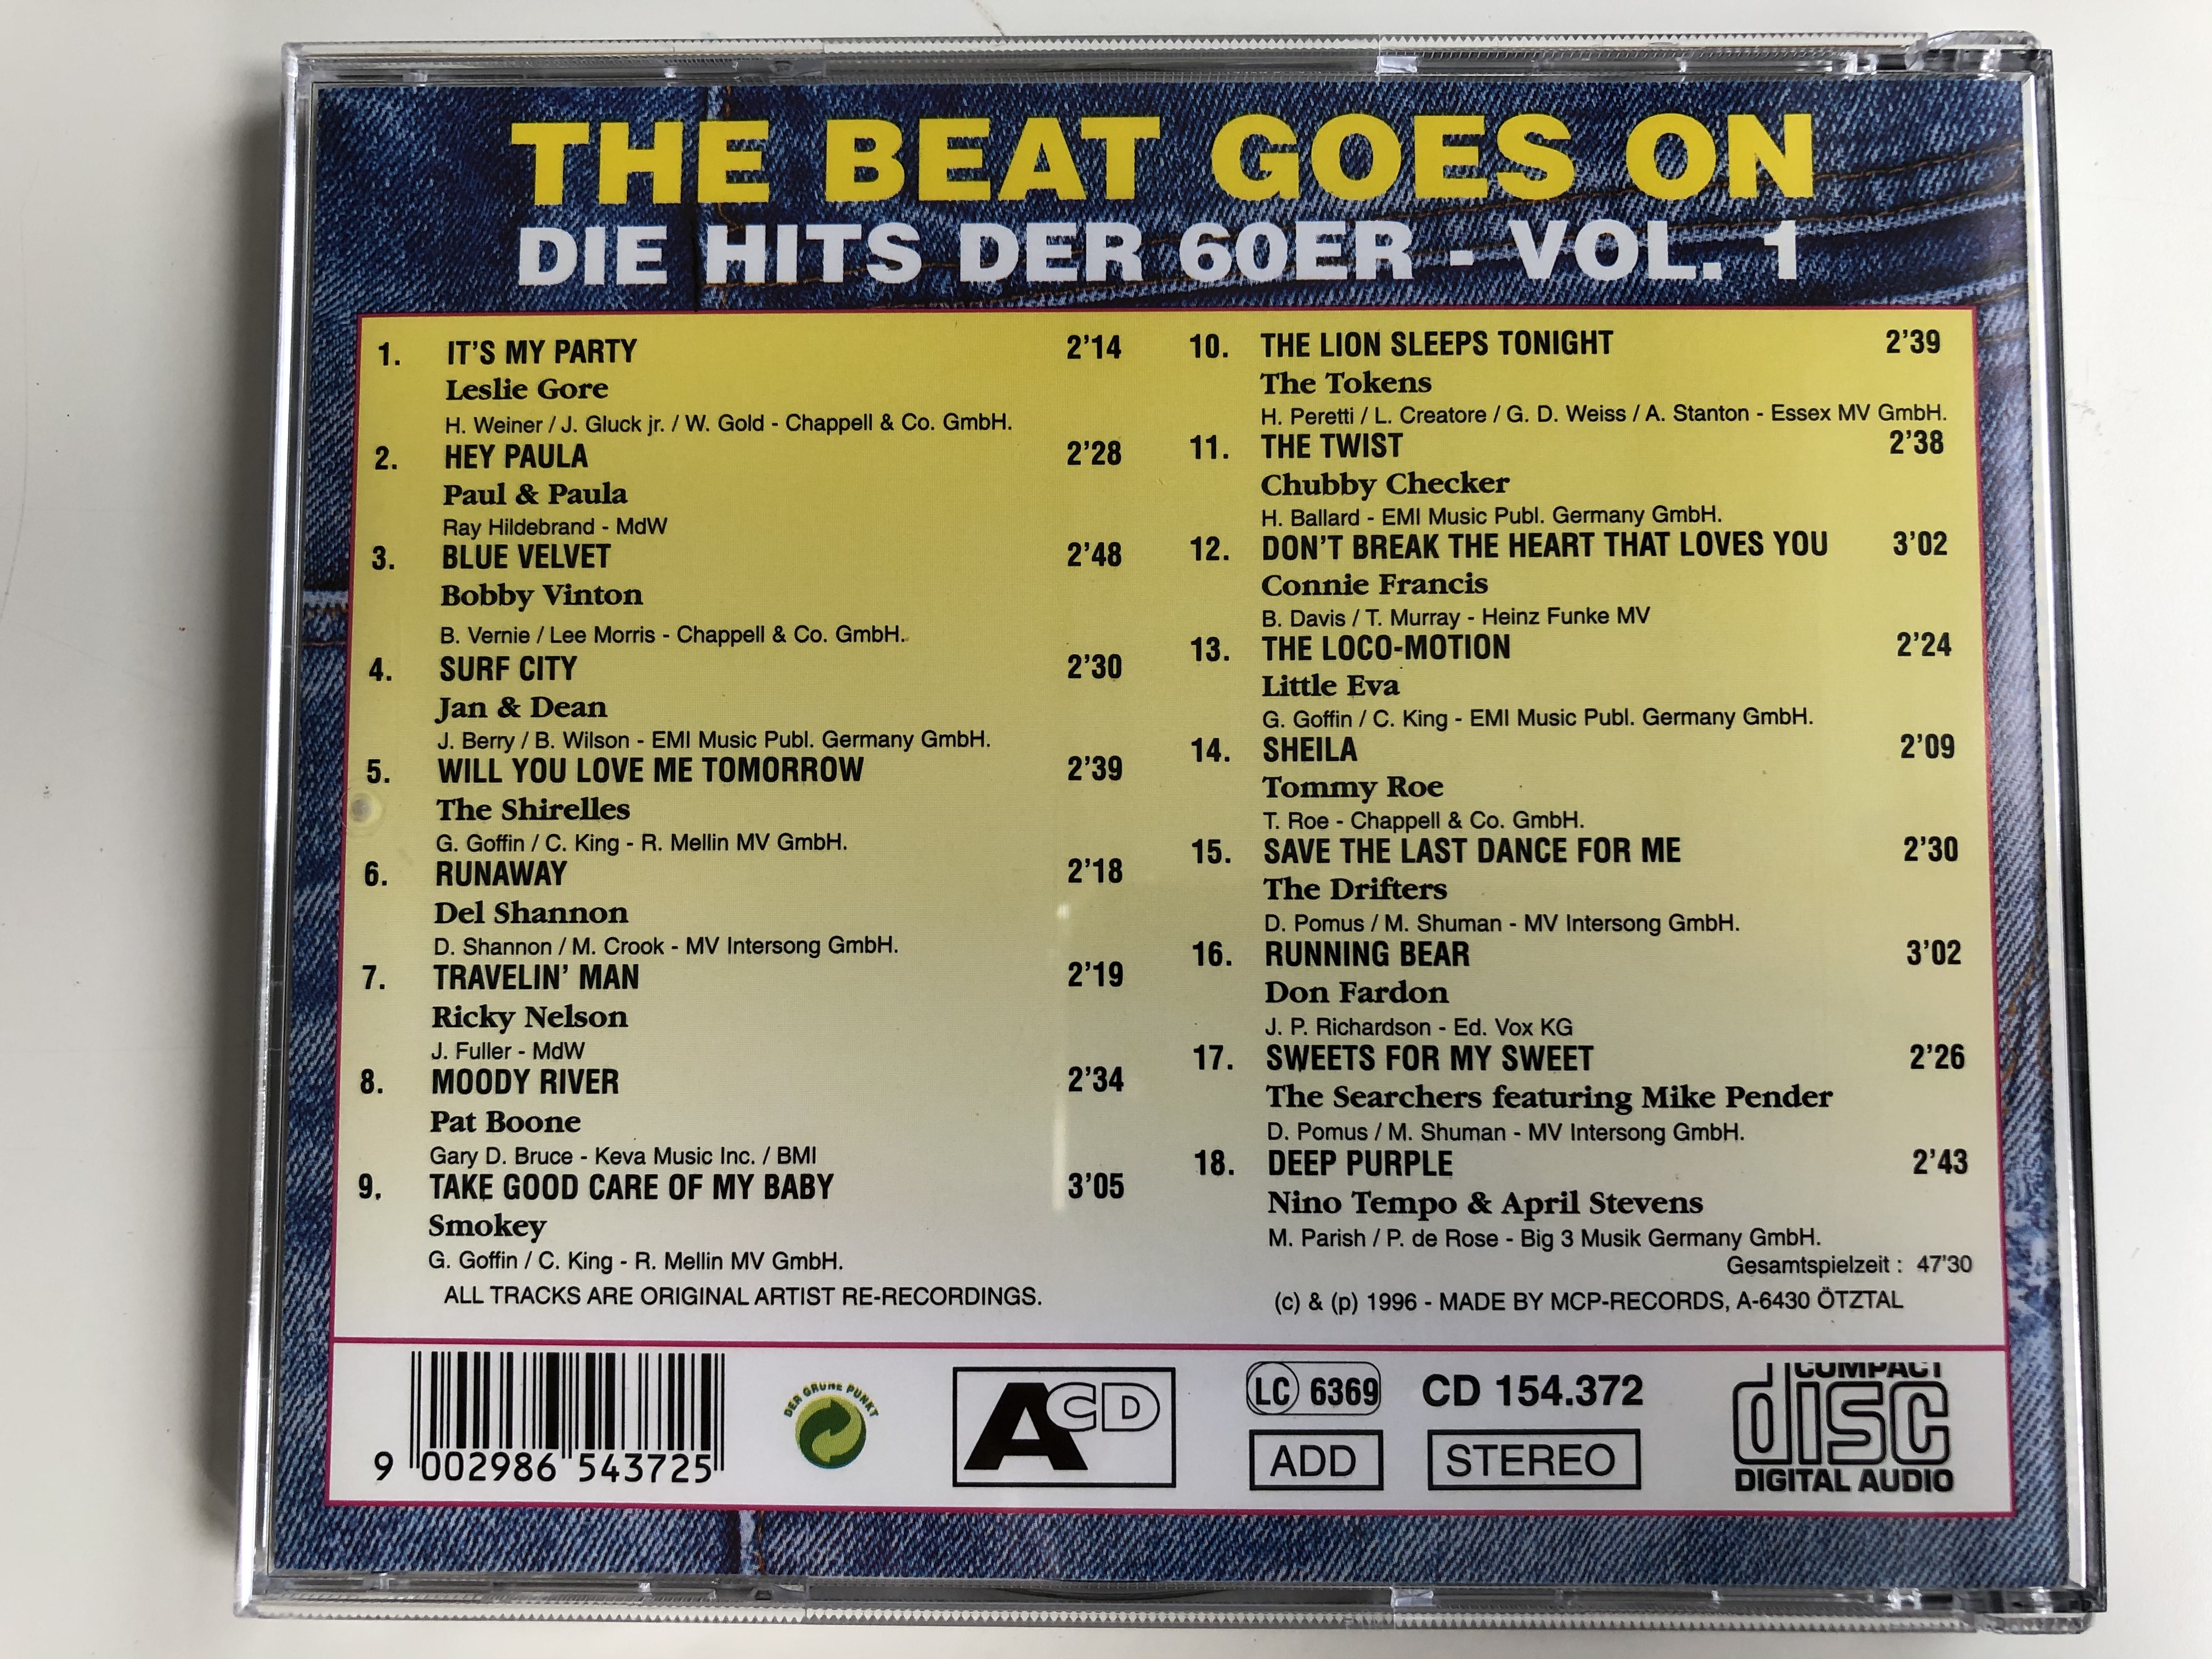 the-beat-goes-on-die-hits-der-60er-vol.-1-it-s-my-party-leslie-gore-blue-velvet-bobby-vinton-the-lion-sleeps-tonight-the-tokens-the-twist-chubby-checker-the-loco-motion-li-2-.jpg